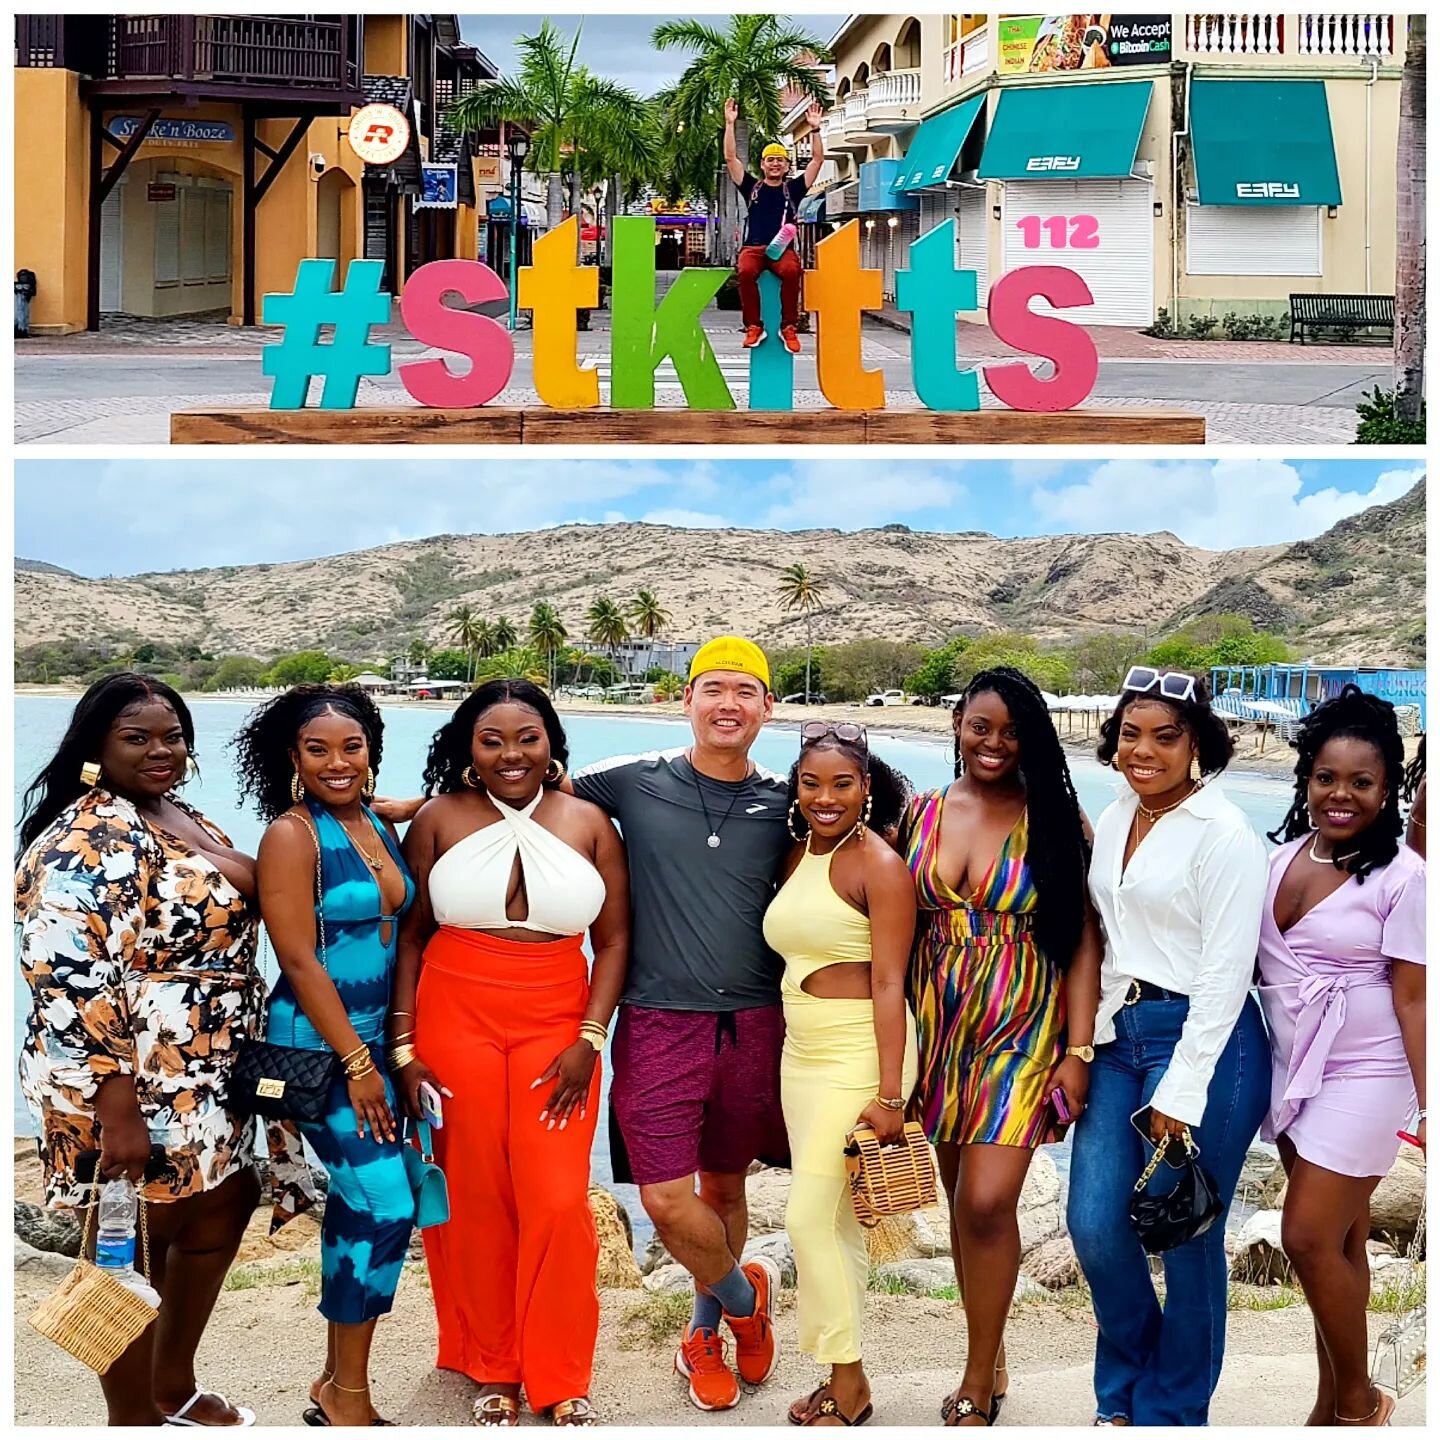 Cheers to Country 112 - St. Kitts &amp; Nevis! A round-trip around the island takes less than 2 hours but you'll remember it for a lifetime. 

Public speaking note - too often people say they're comfortable around one or two people, but once it gets 